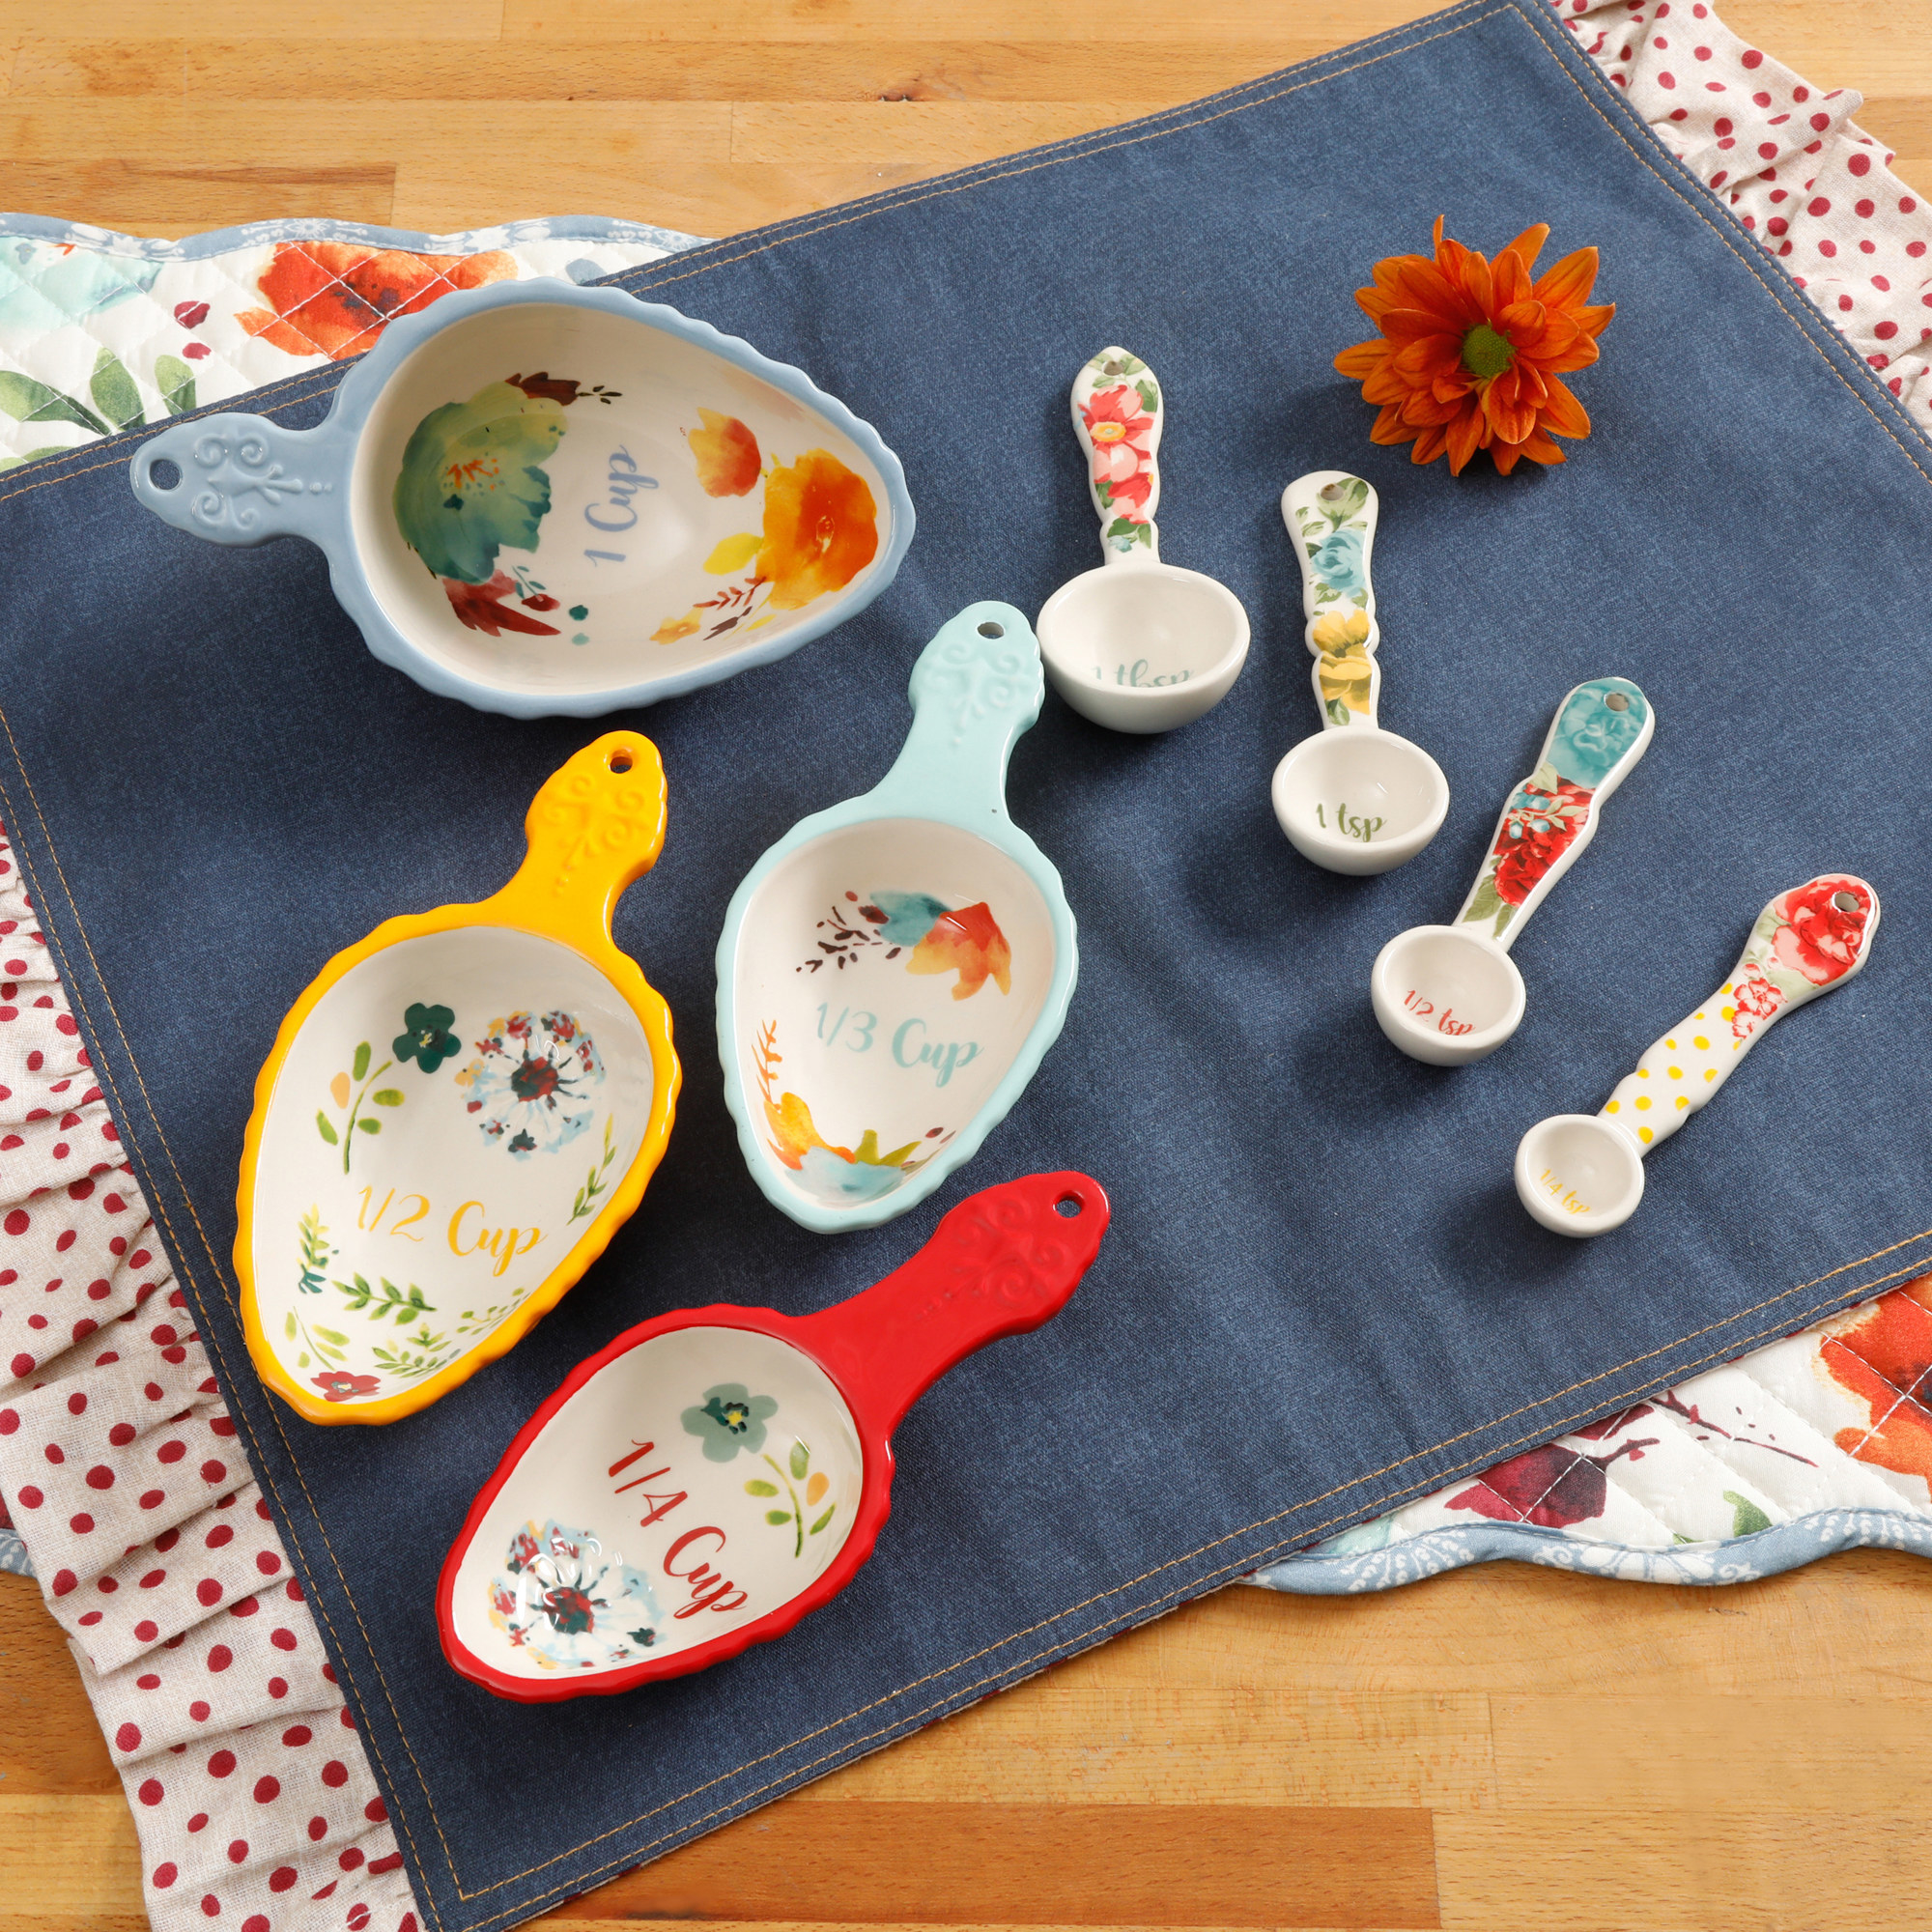 the multicolored and floral measuring spoons and cups